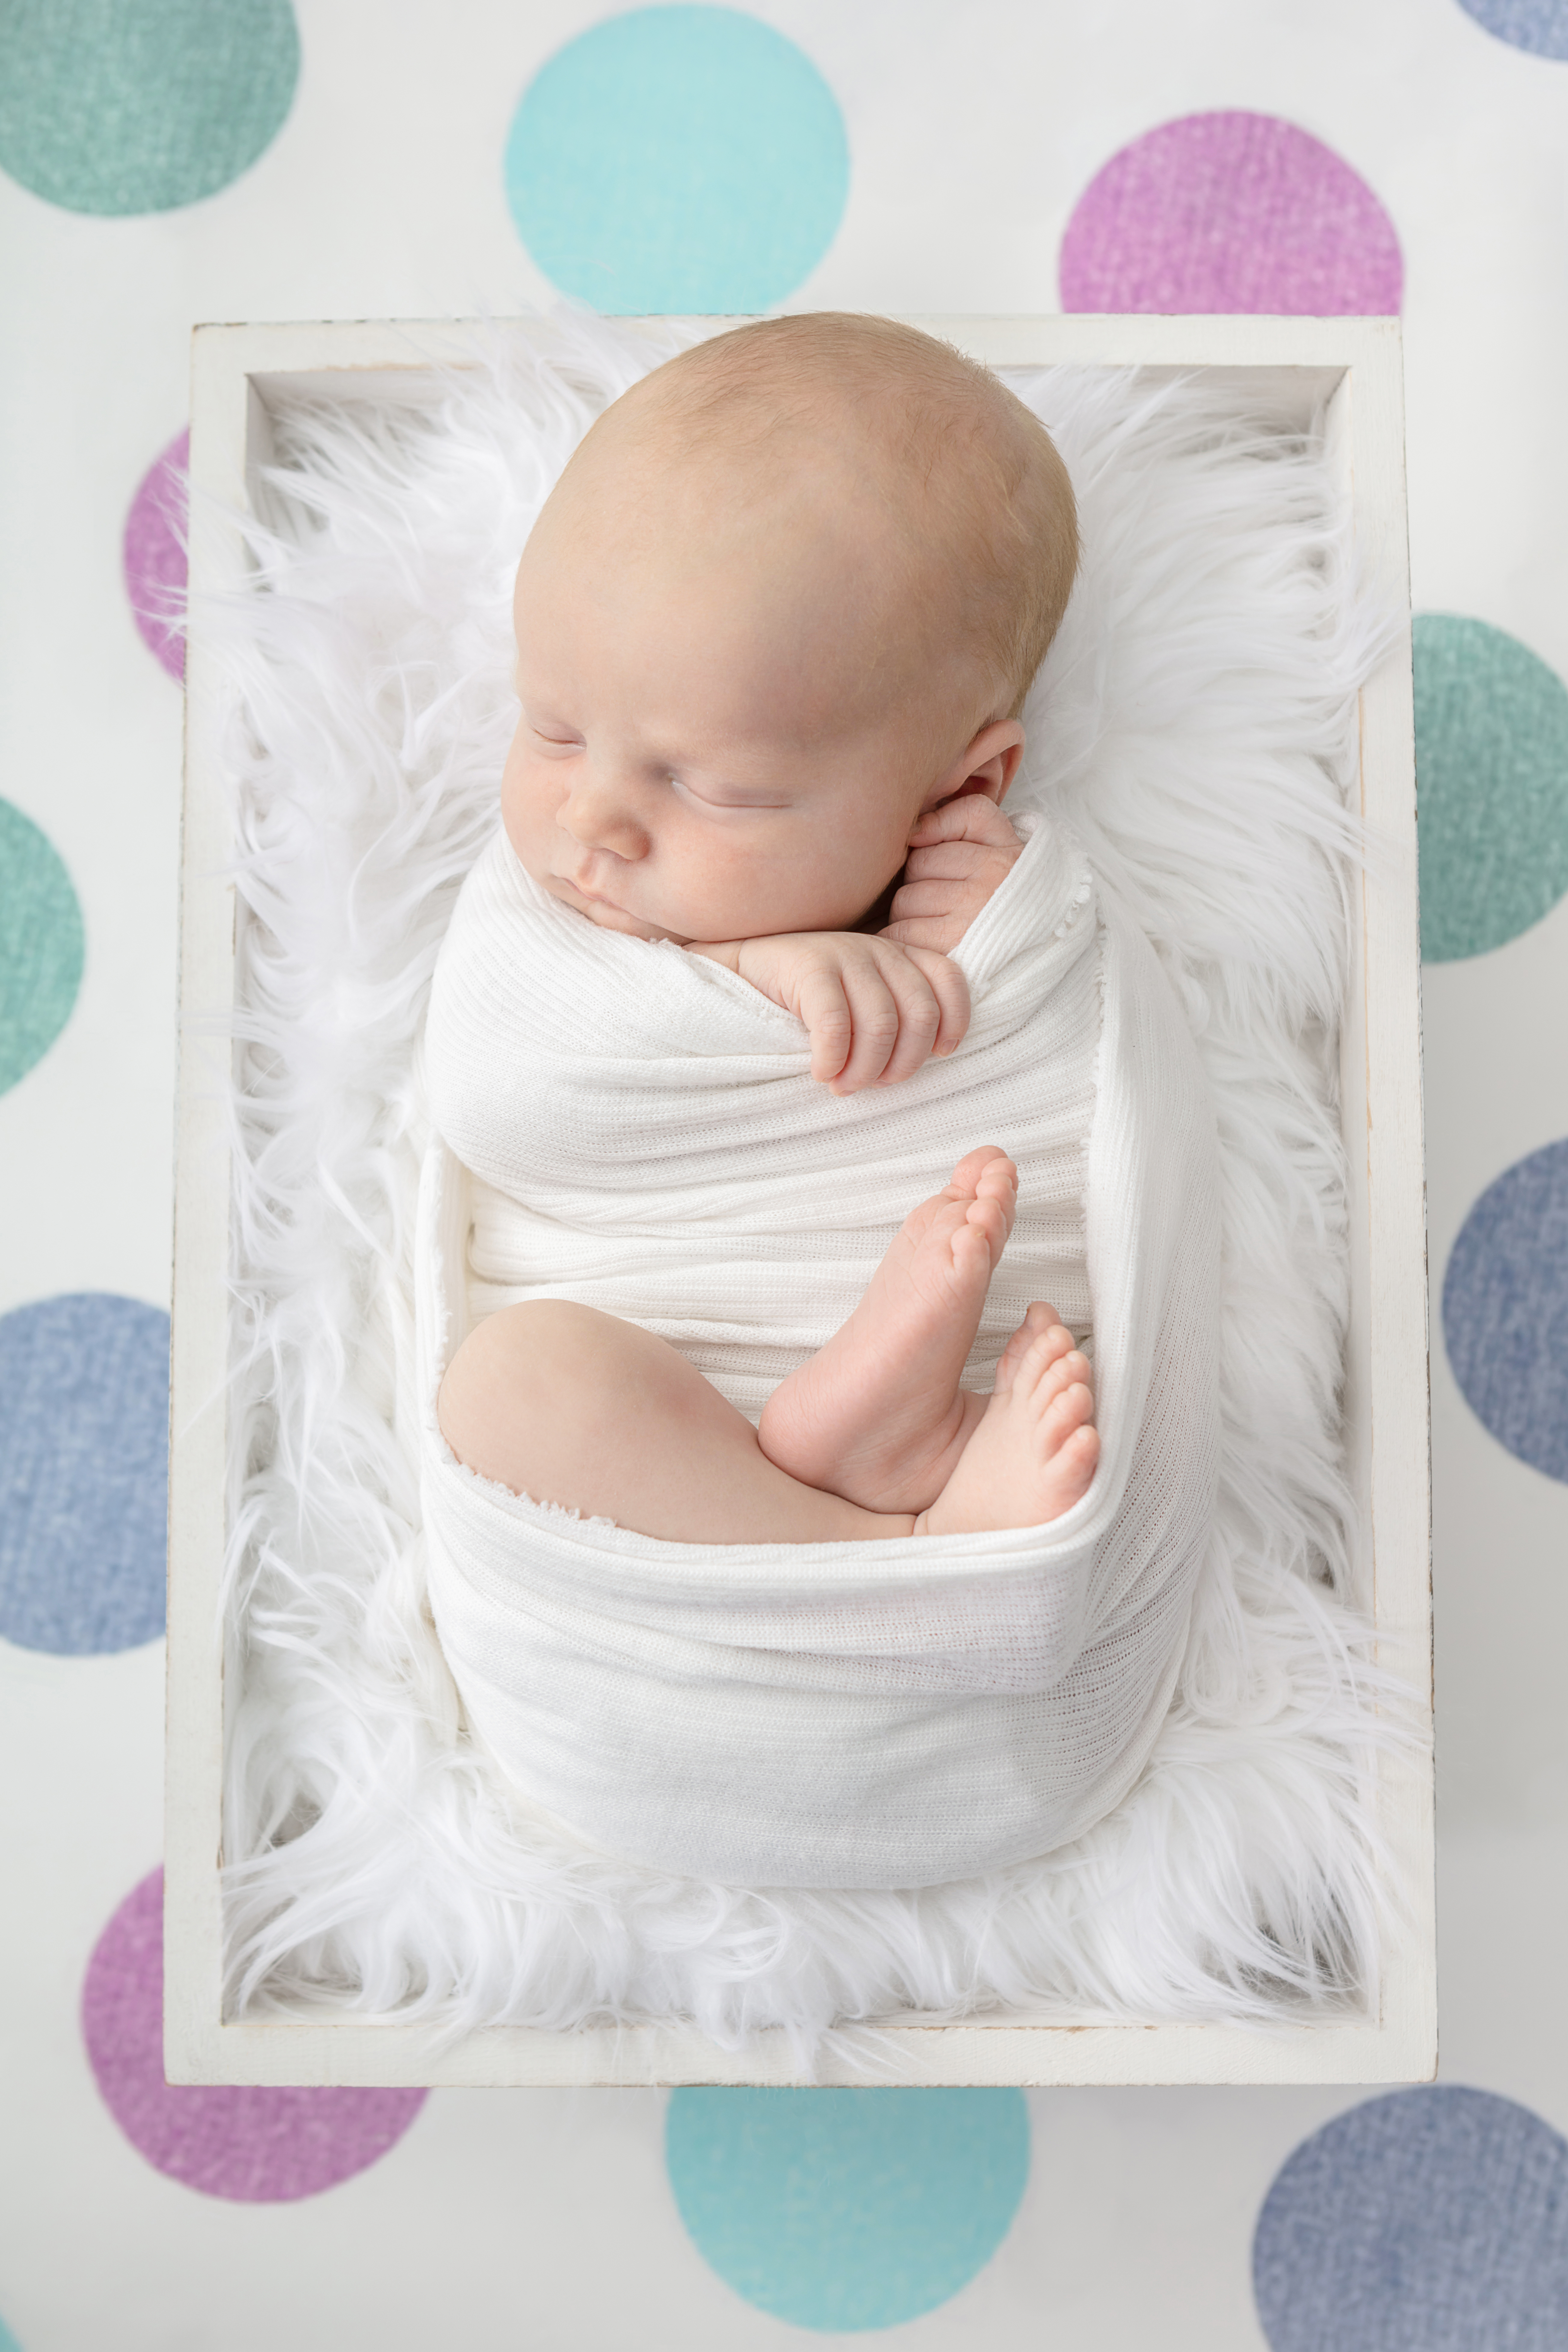 newborn baby boy swaddled in white with his hands and feet peeking out; white flokati